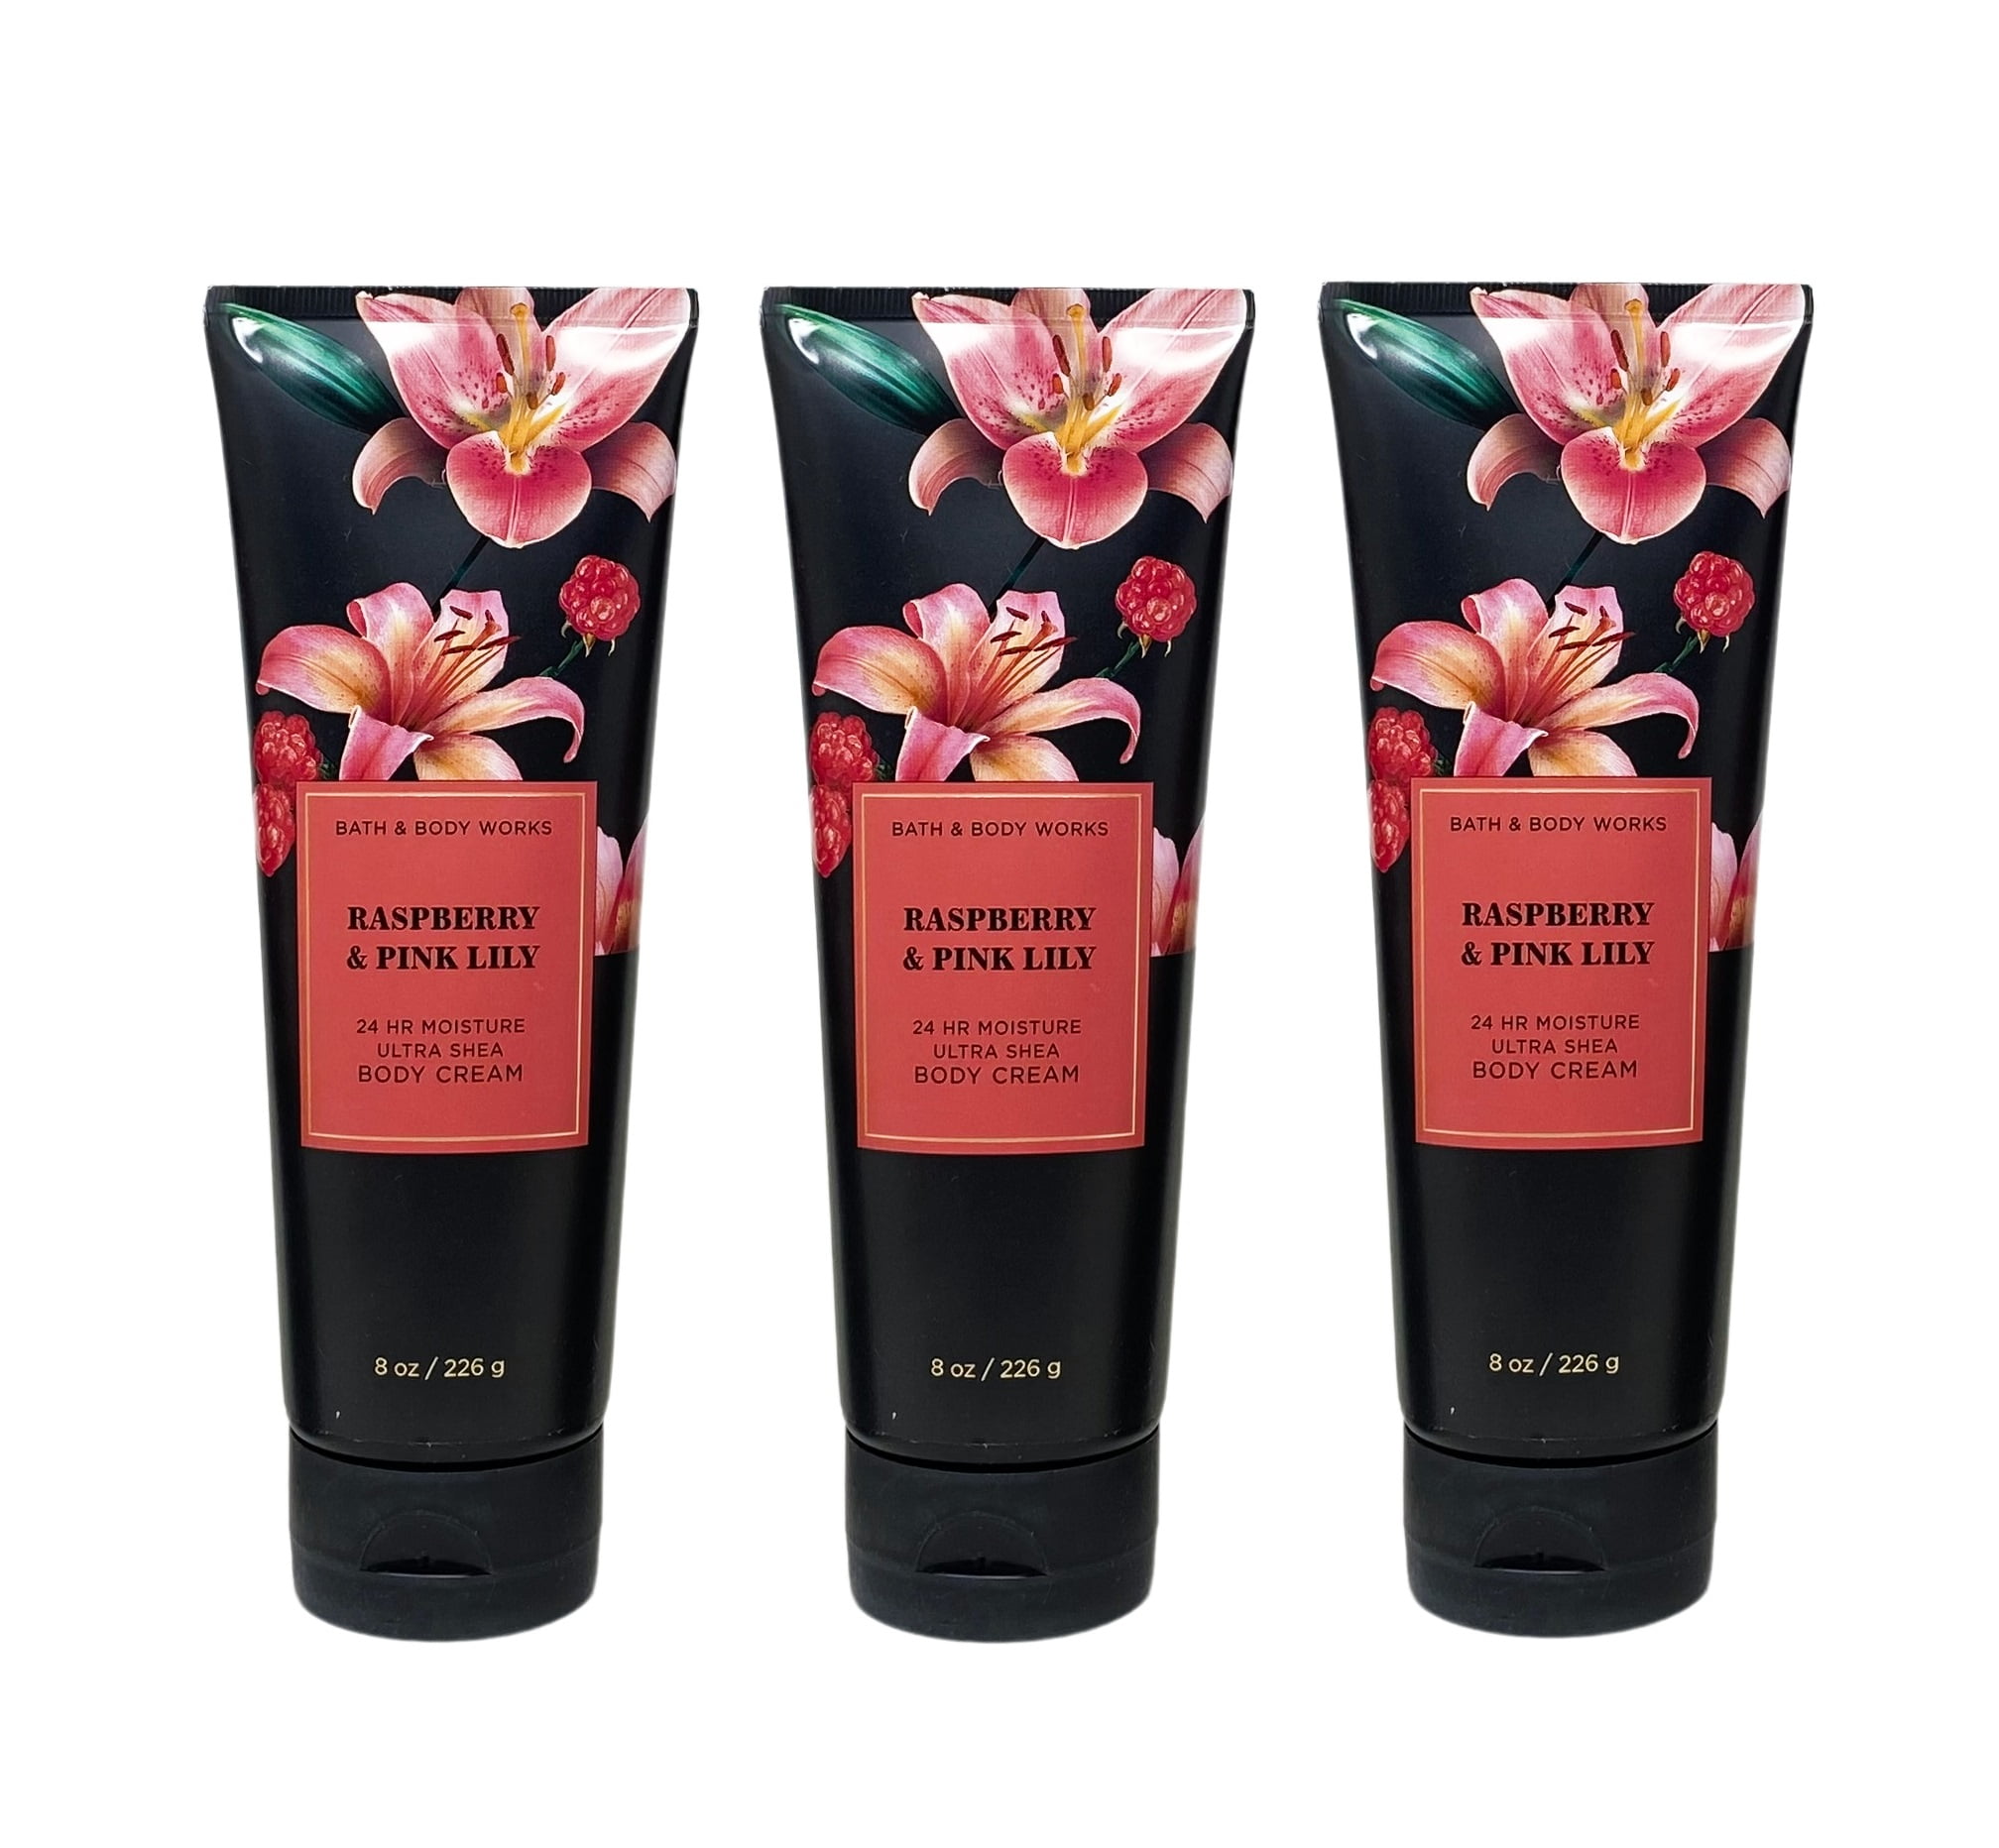 Bath And Body Works Raspberry And Pink Lily 3 Piece Ultra Shea Body Cream Value Pack 8 Oz 226